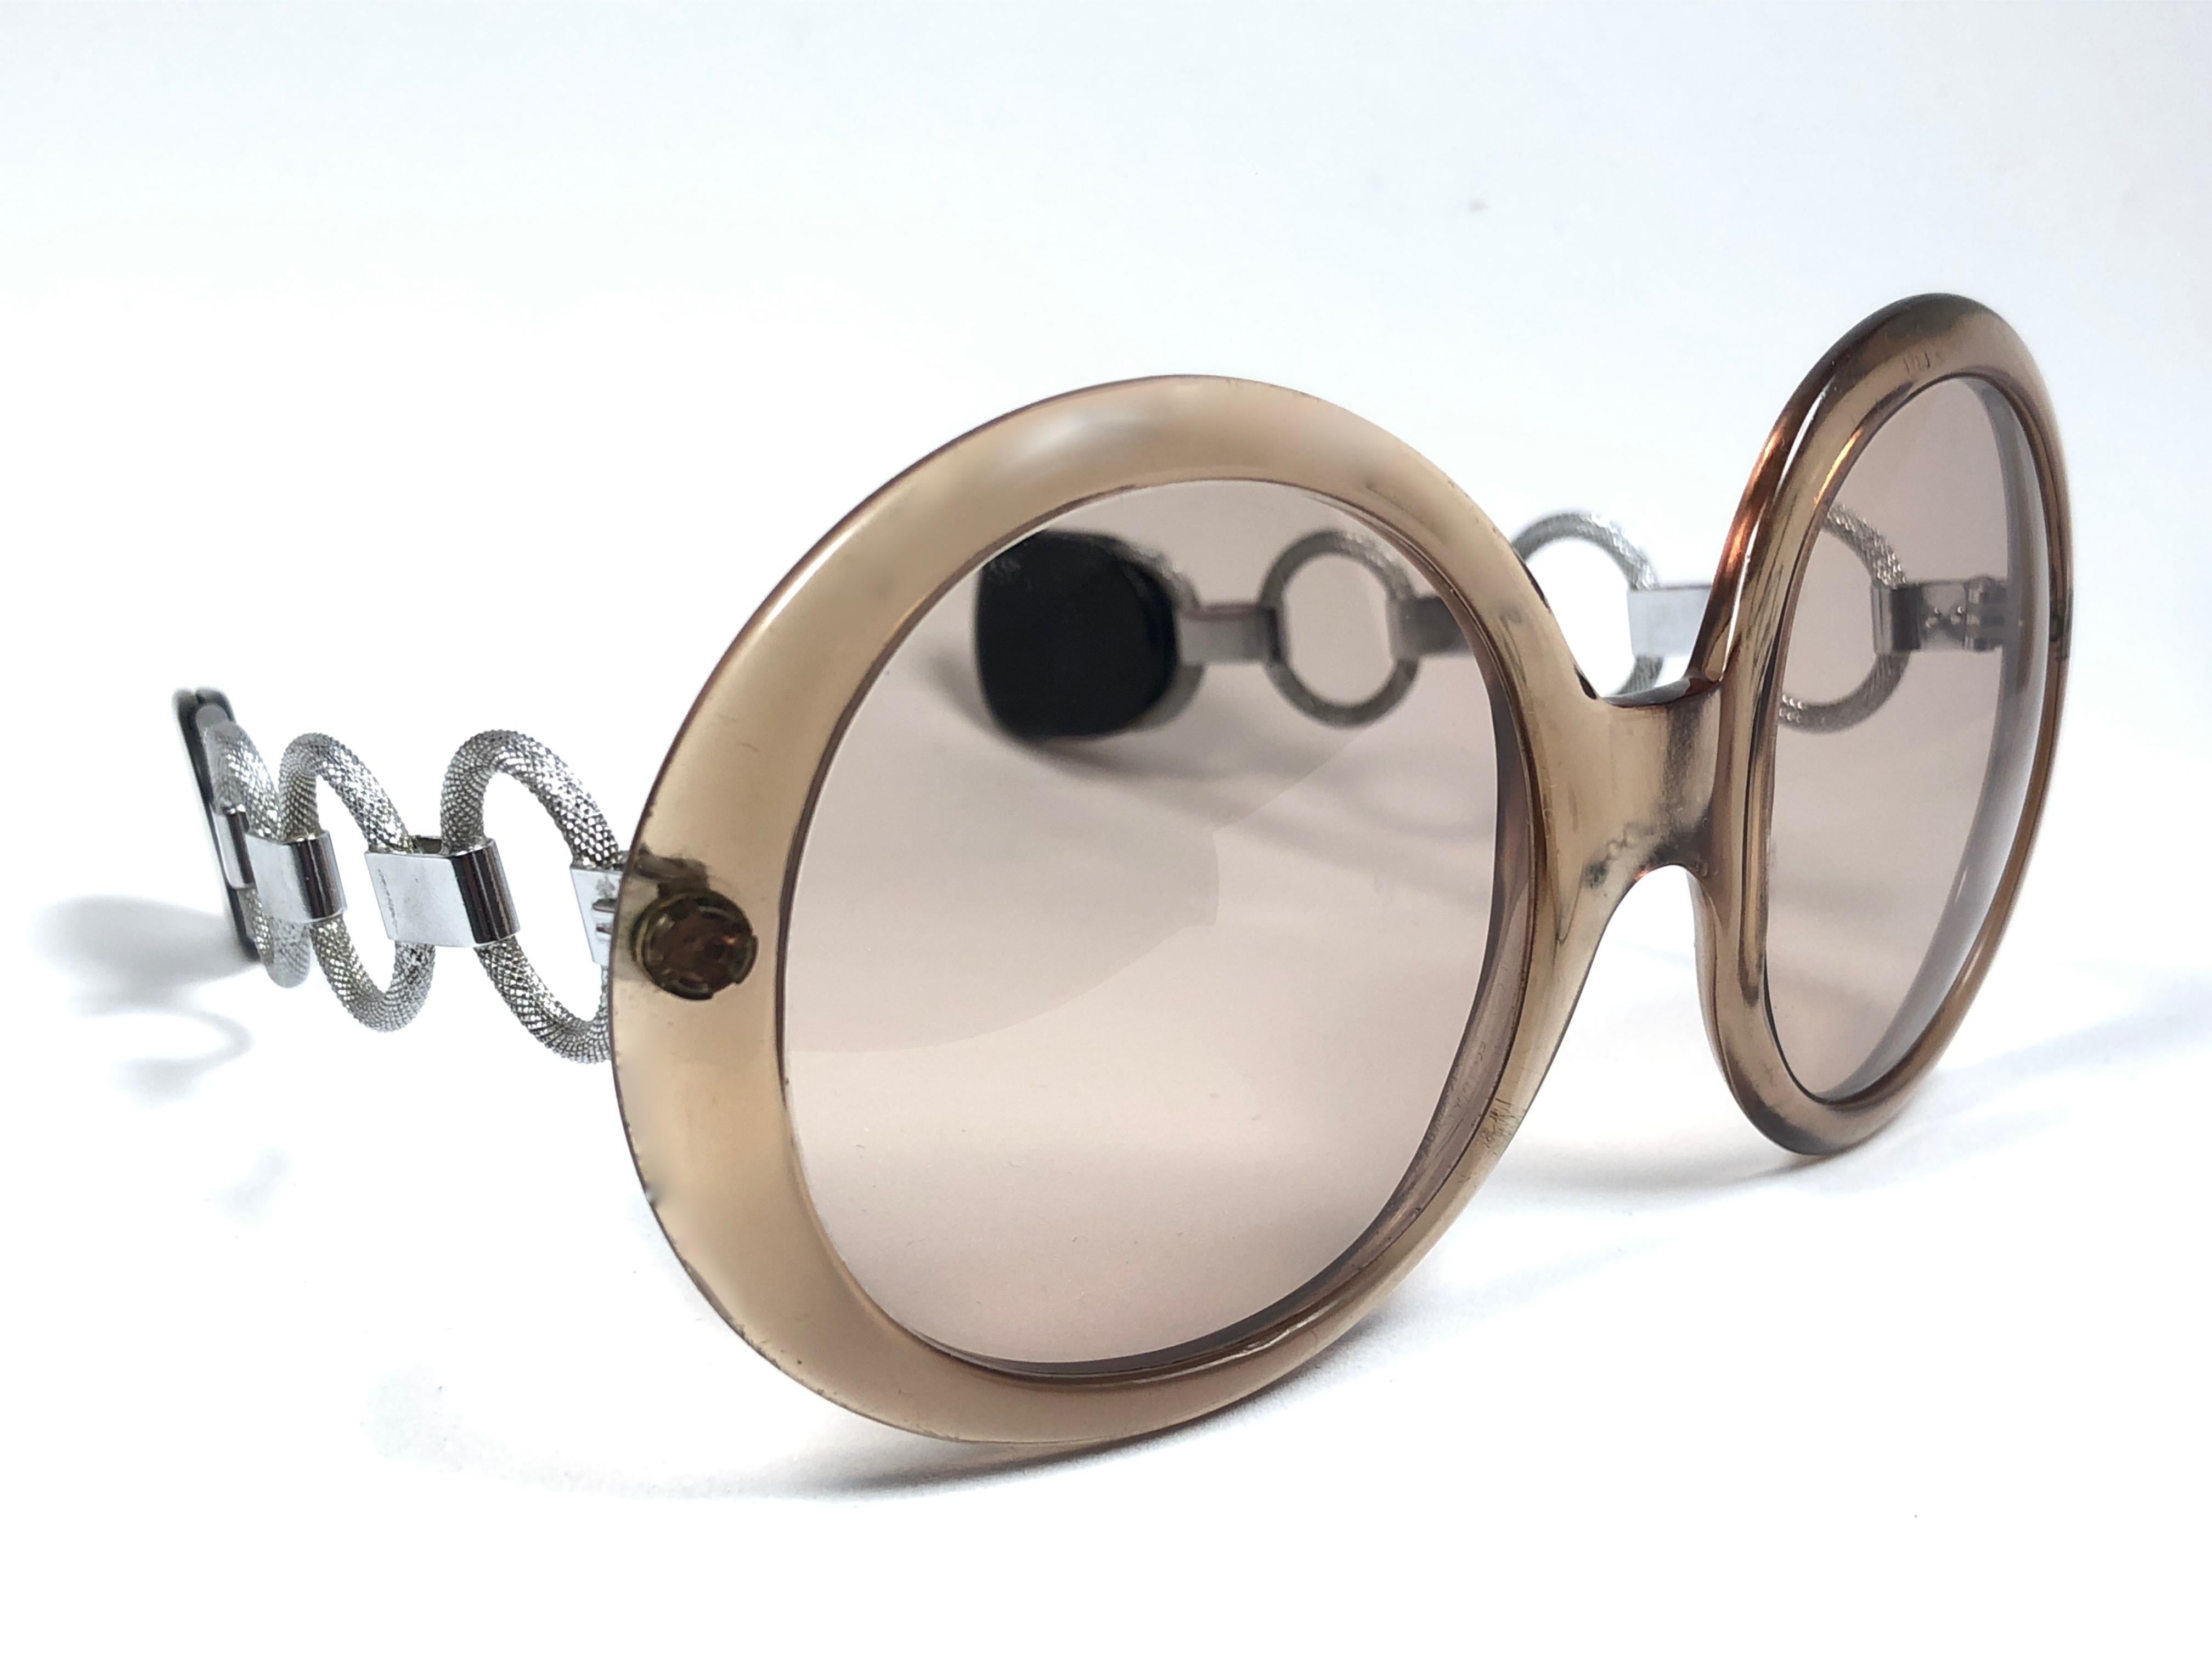 Mint vintage Serge Kirchhofer sunglasses. 

Spotles lenses.

This item may show minor sign of wear on the acetate frame.

Made in Austria